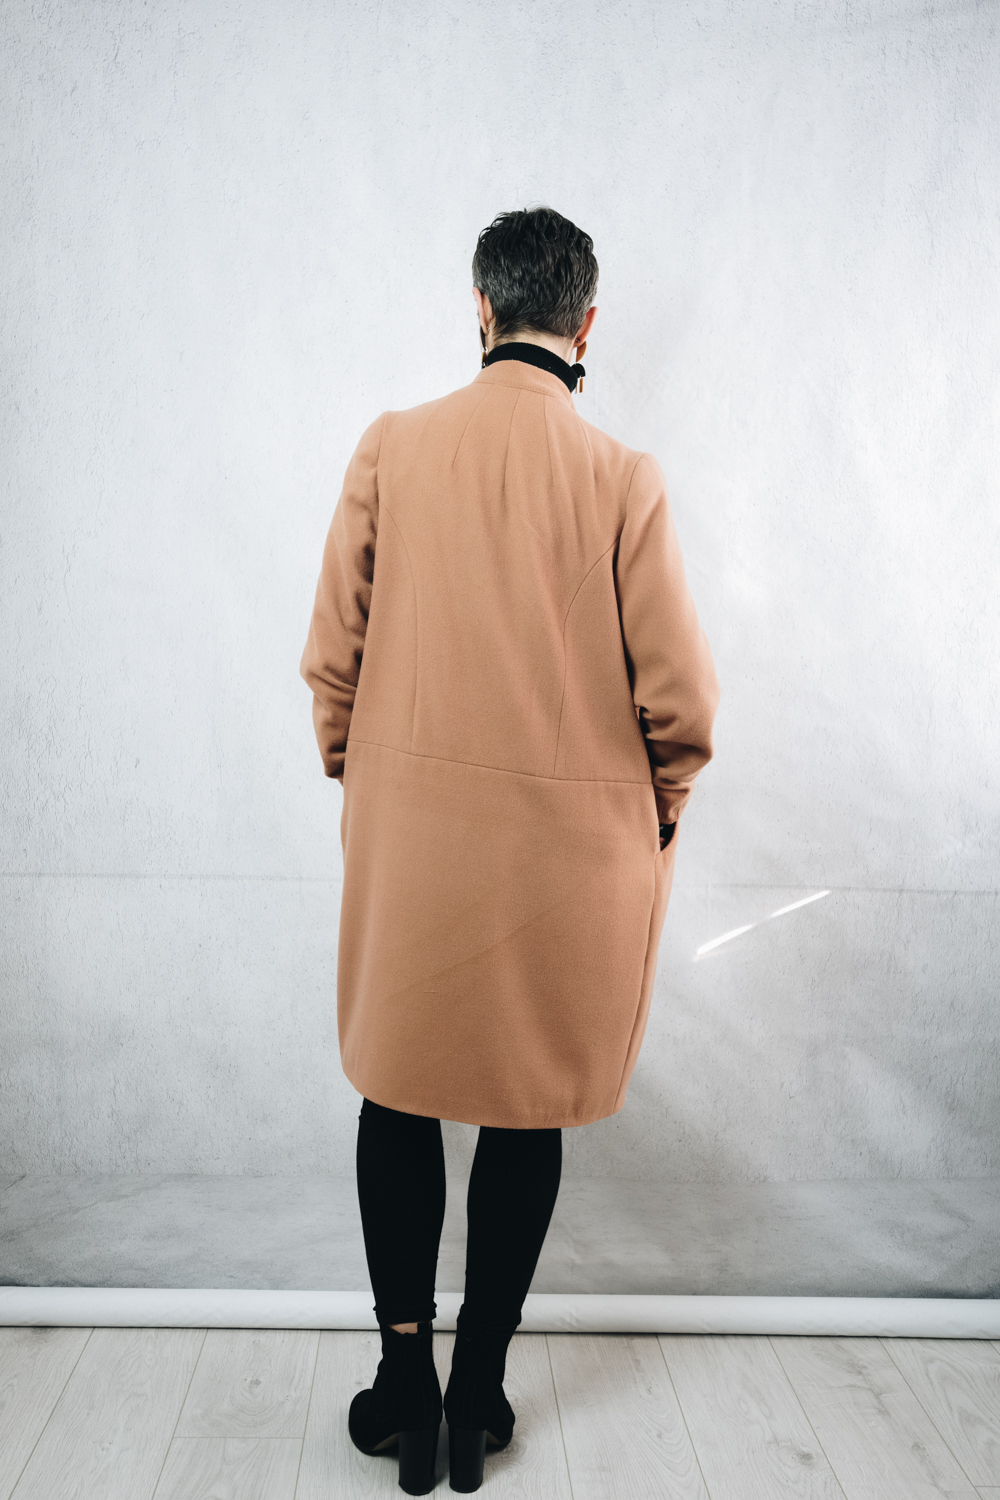 DIY Camel Coat, made using the Dawson Coatigan sewing pattern, by The Thrifty Stitcher